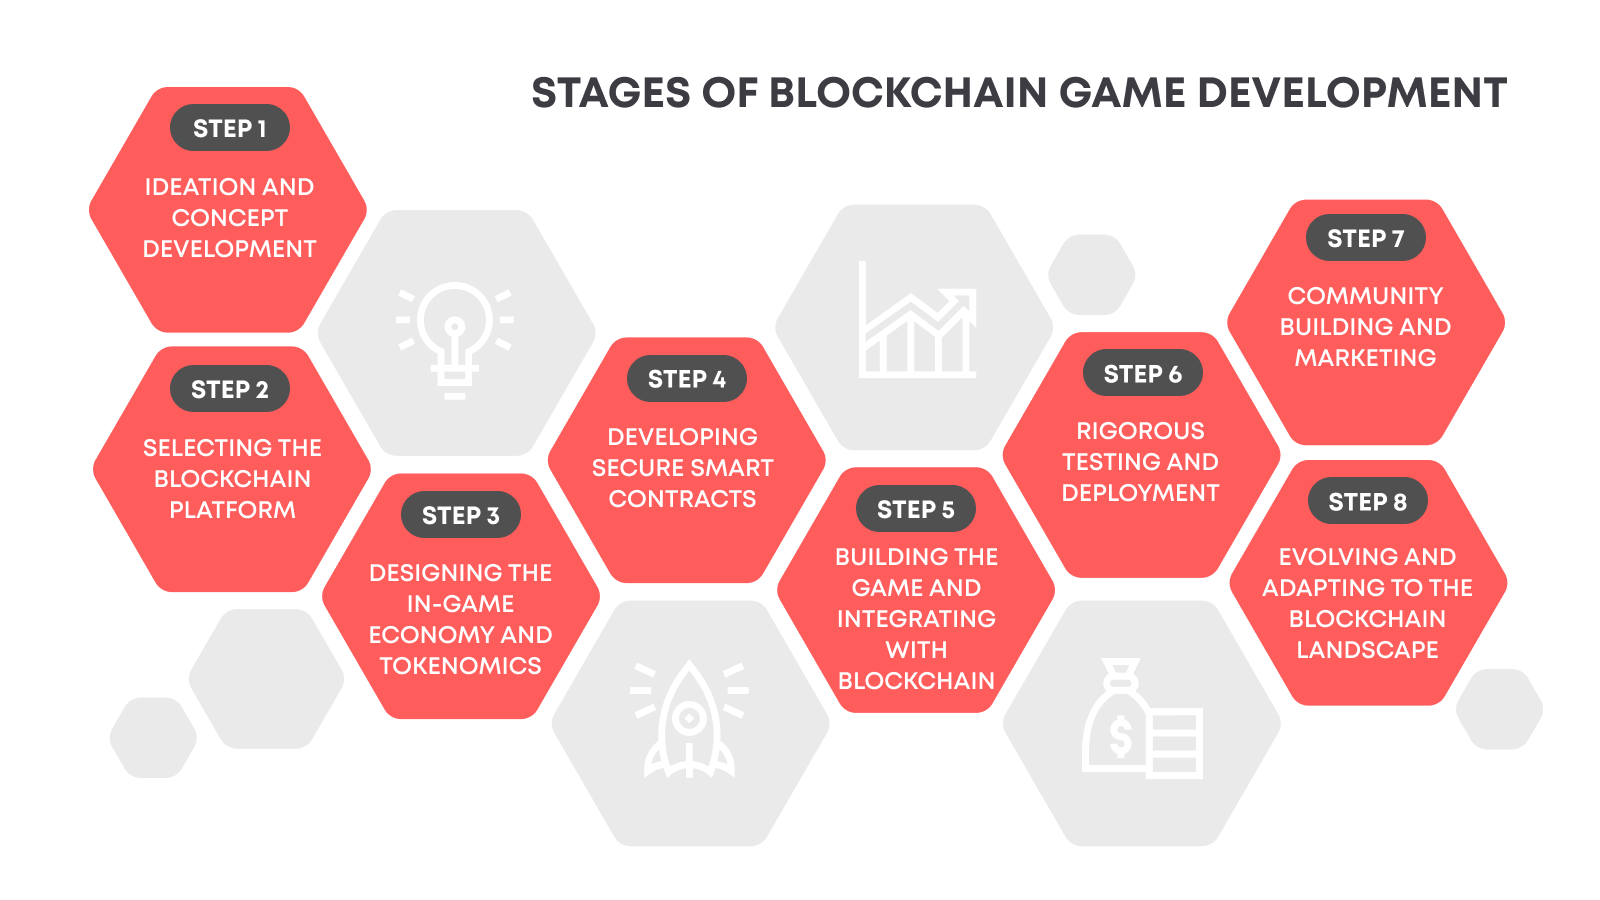 The world of blockchain gaming presents plenty of opportunities for developers and creatives alike.